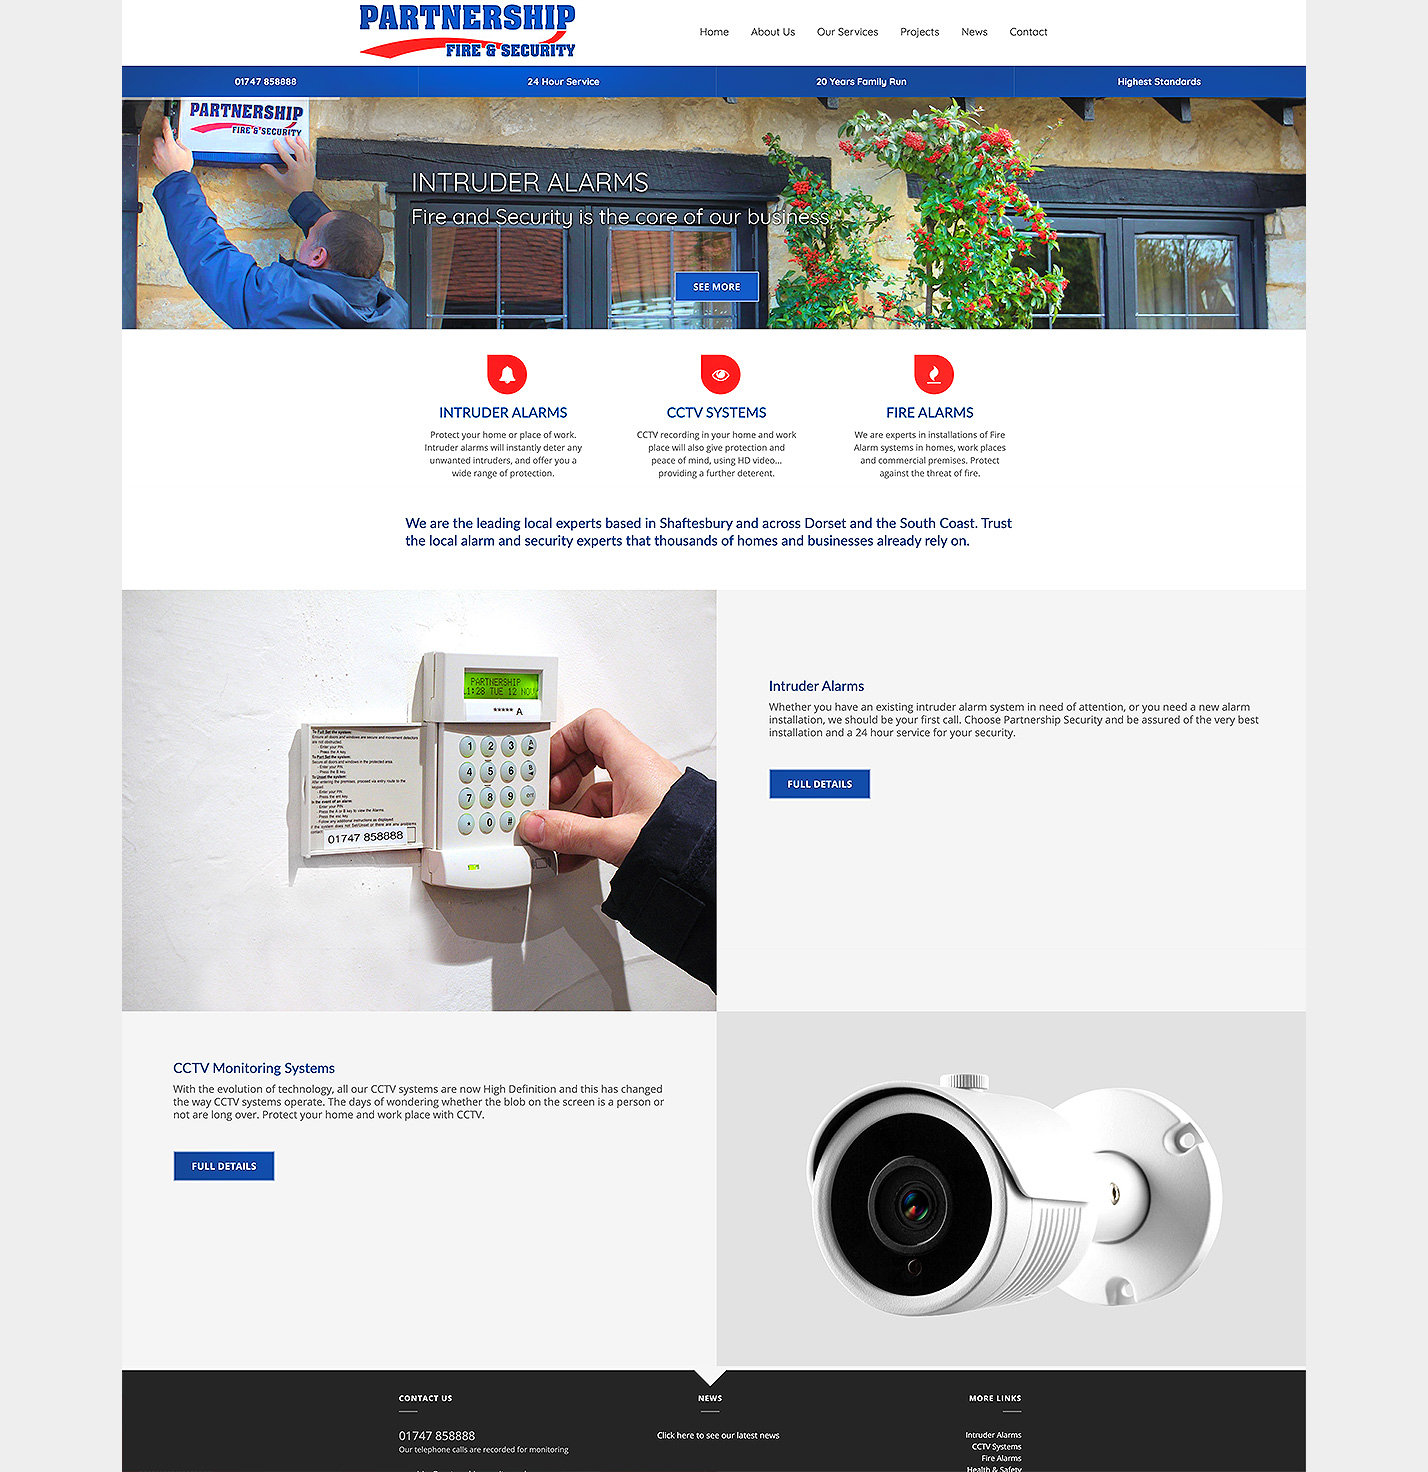 Partnership Security are a well trusted security company. We had a great time making their website.